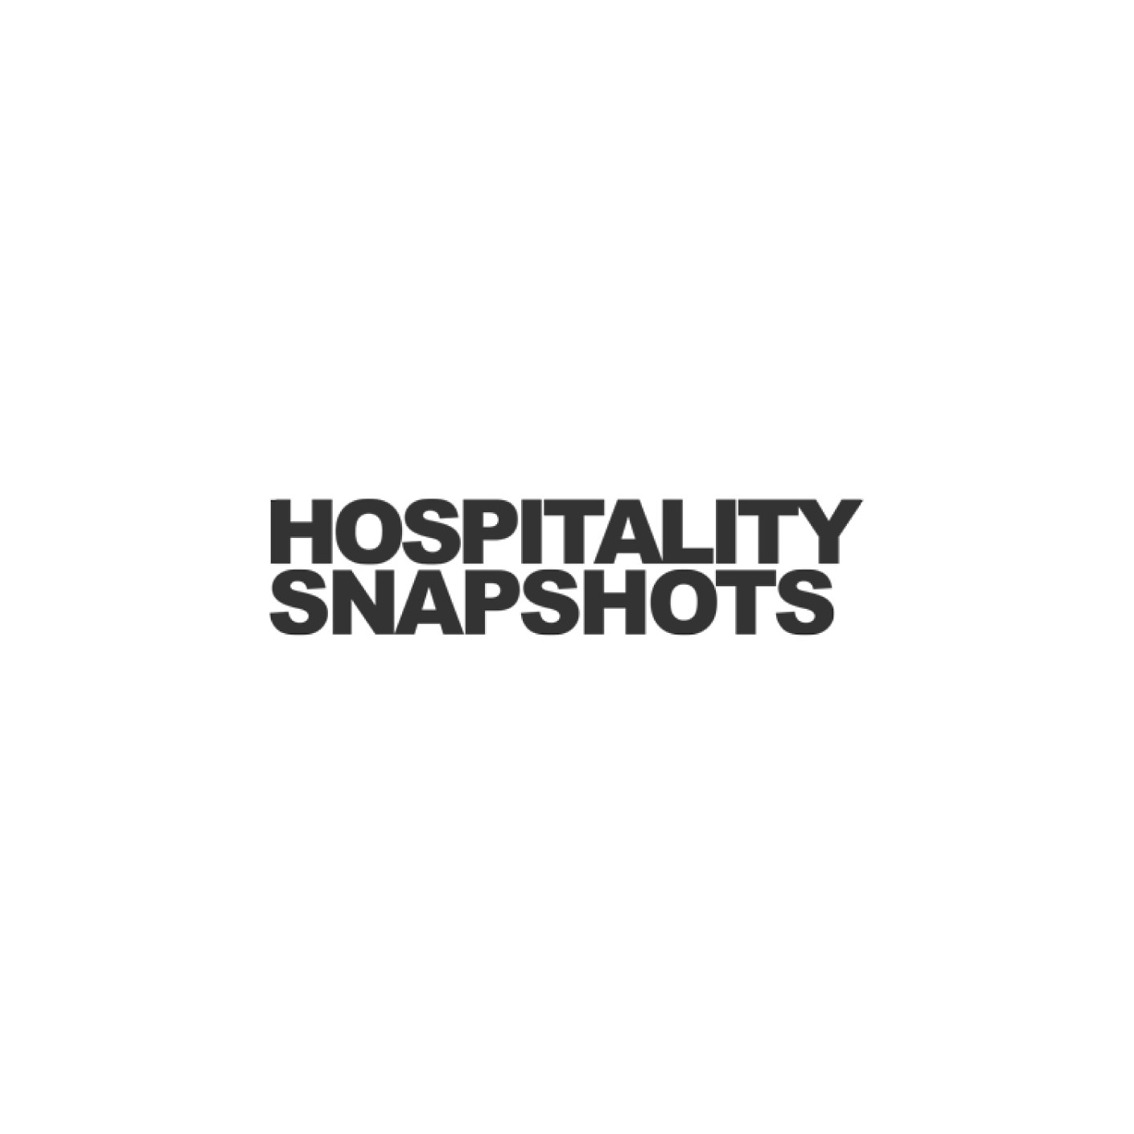 Hospitality Snapshots, 2020 MMAPROJECTS S.R.L.